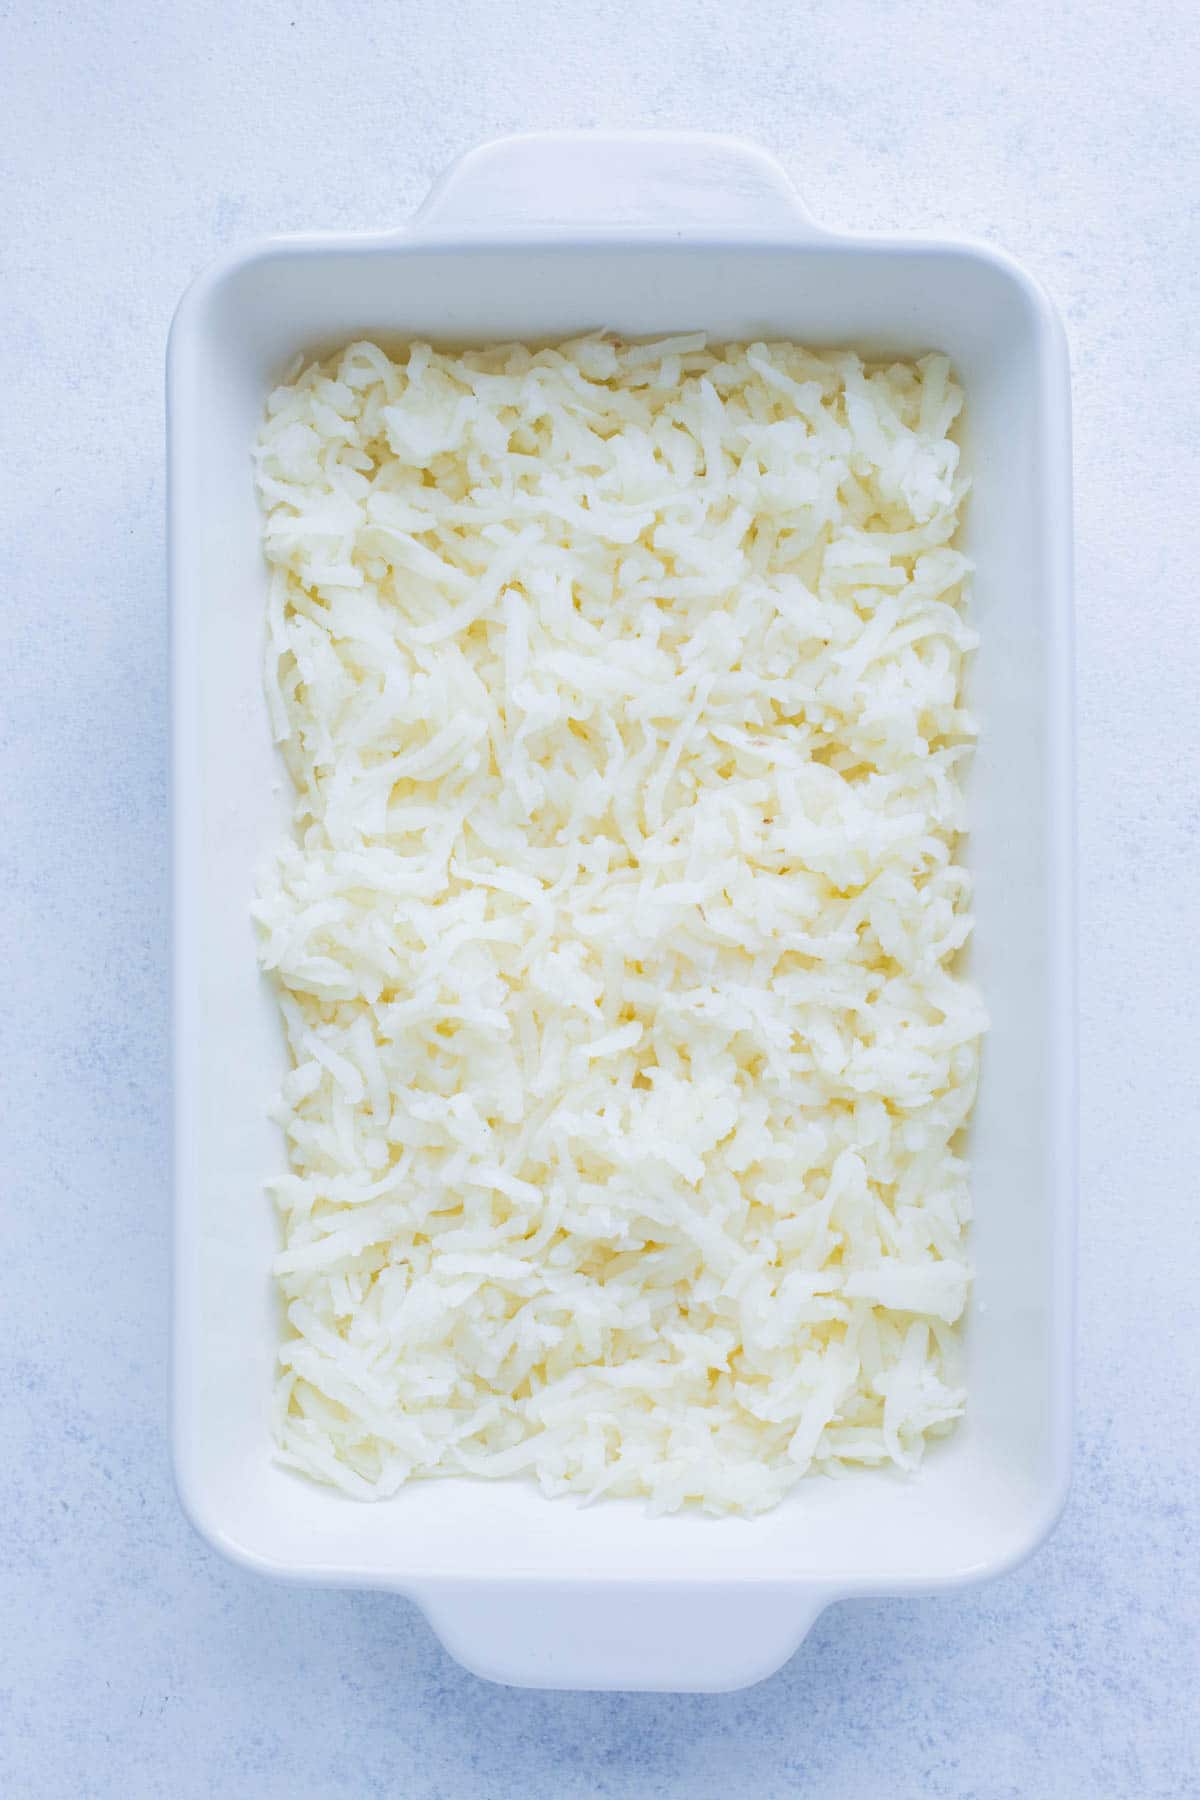 Hashbrowns are laid first in a baking dish.